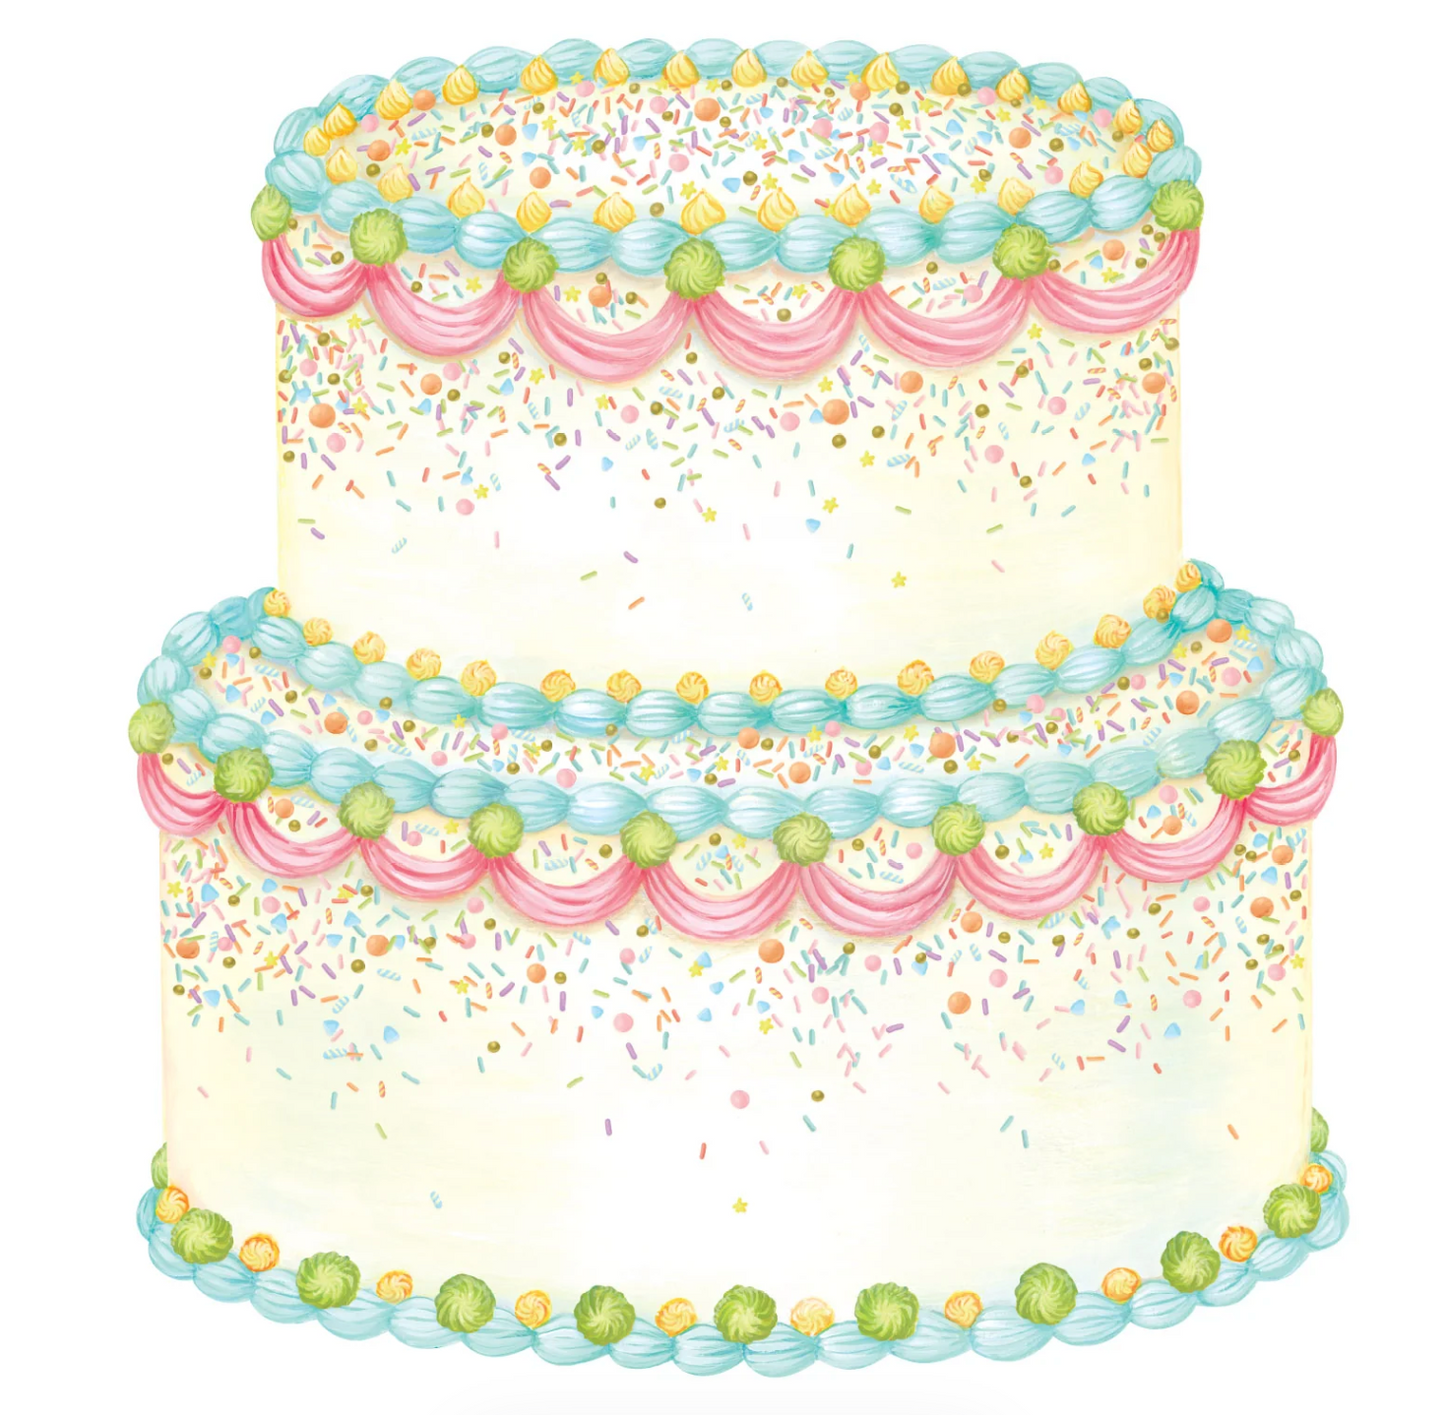 Load image into Gallery viewer, Die-cut Birthday Cake Placemat
